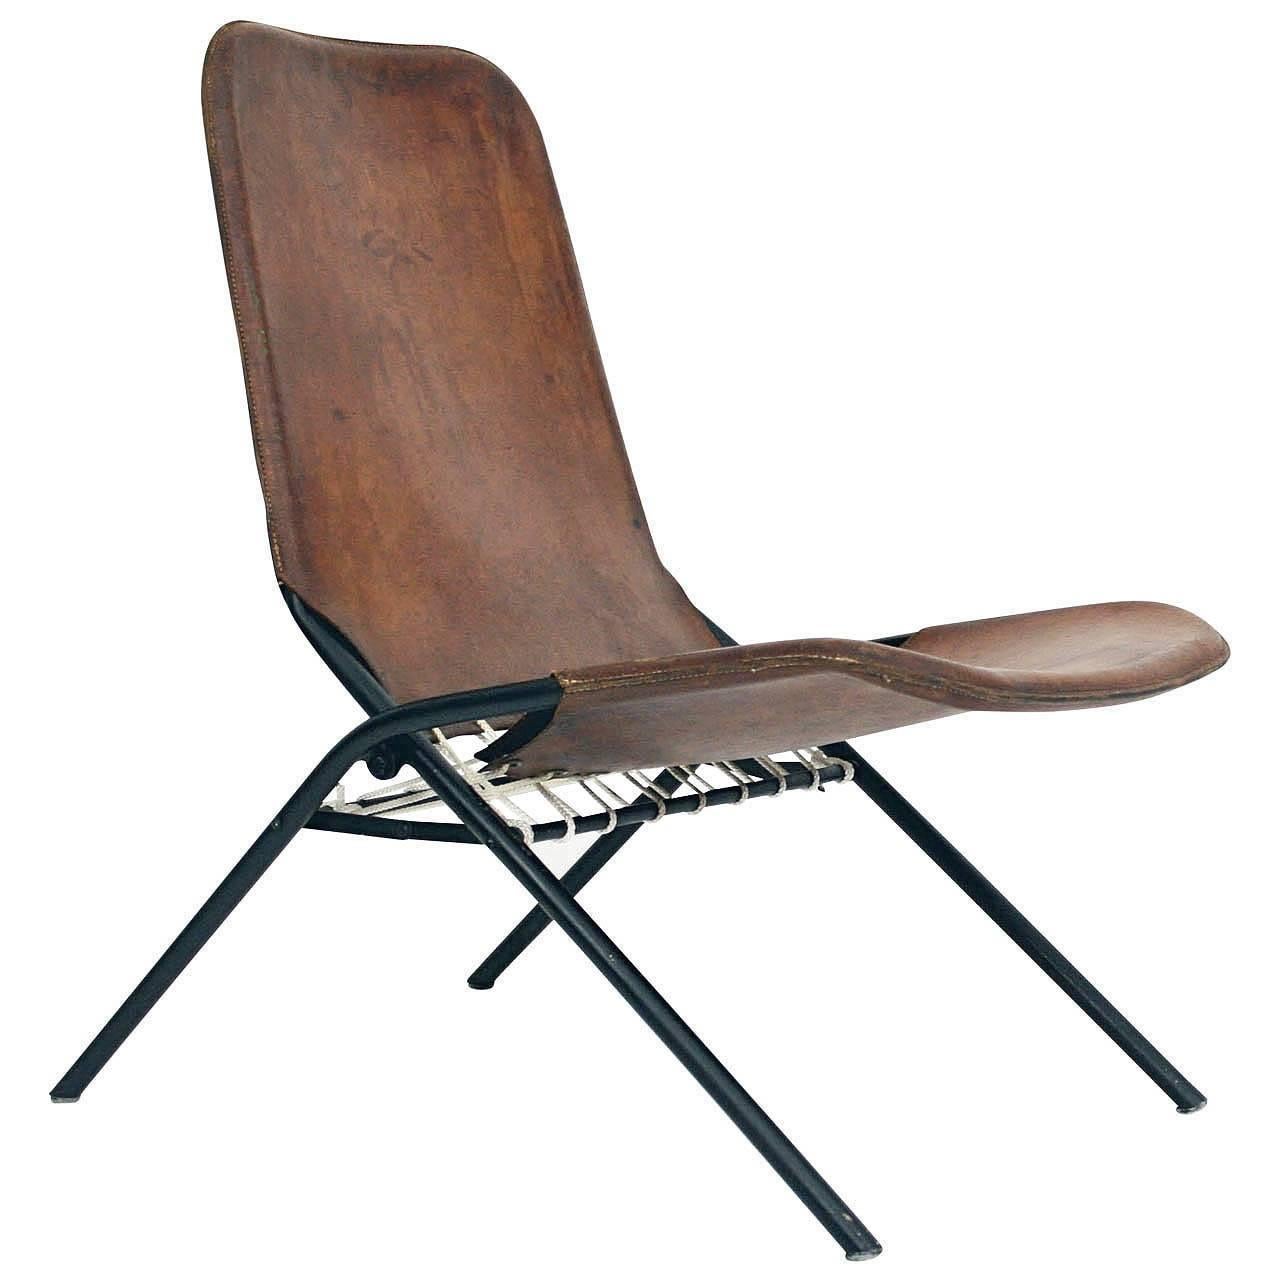 Rare Olof Pira Leather Folding Chair For Sale